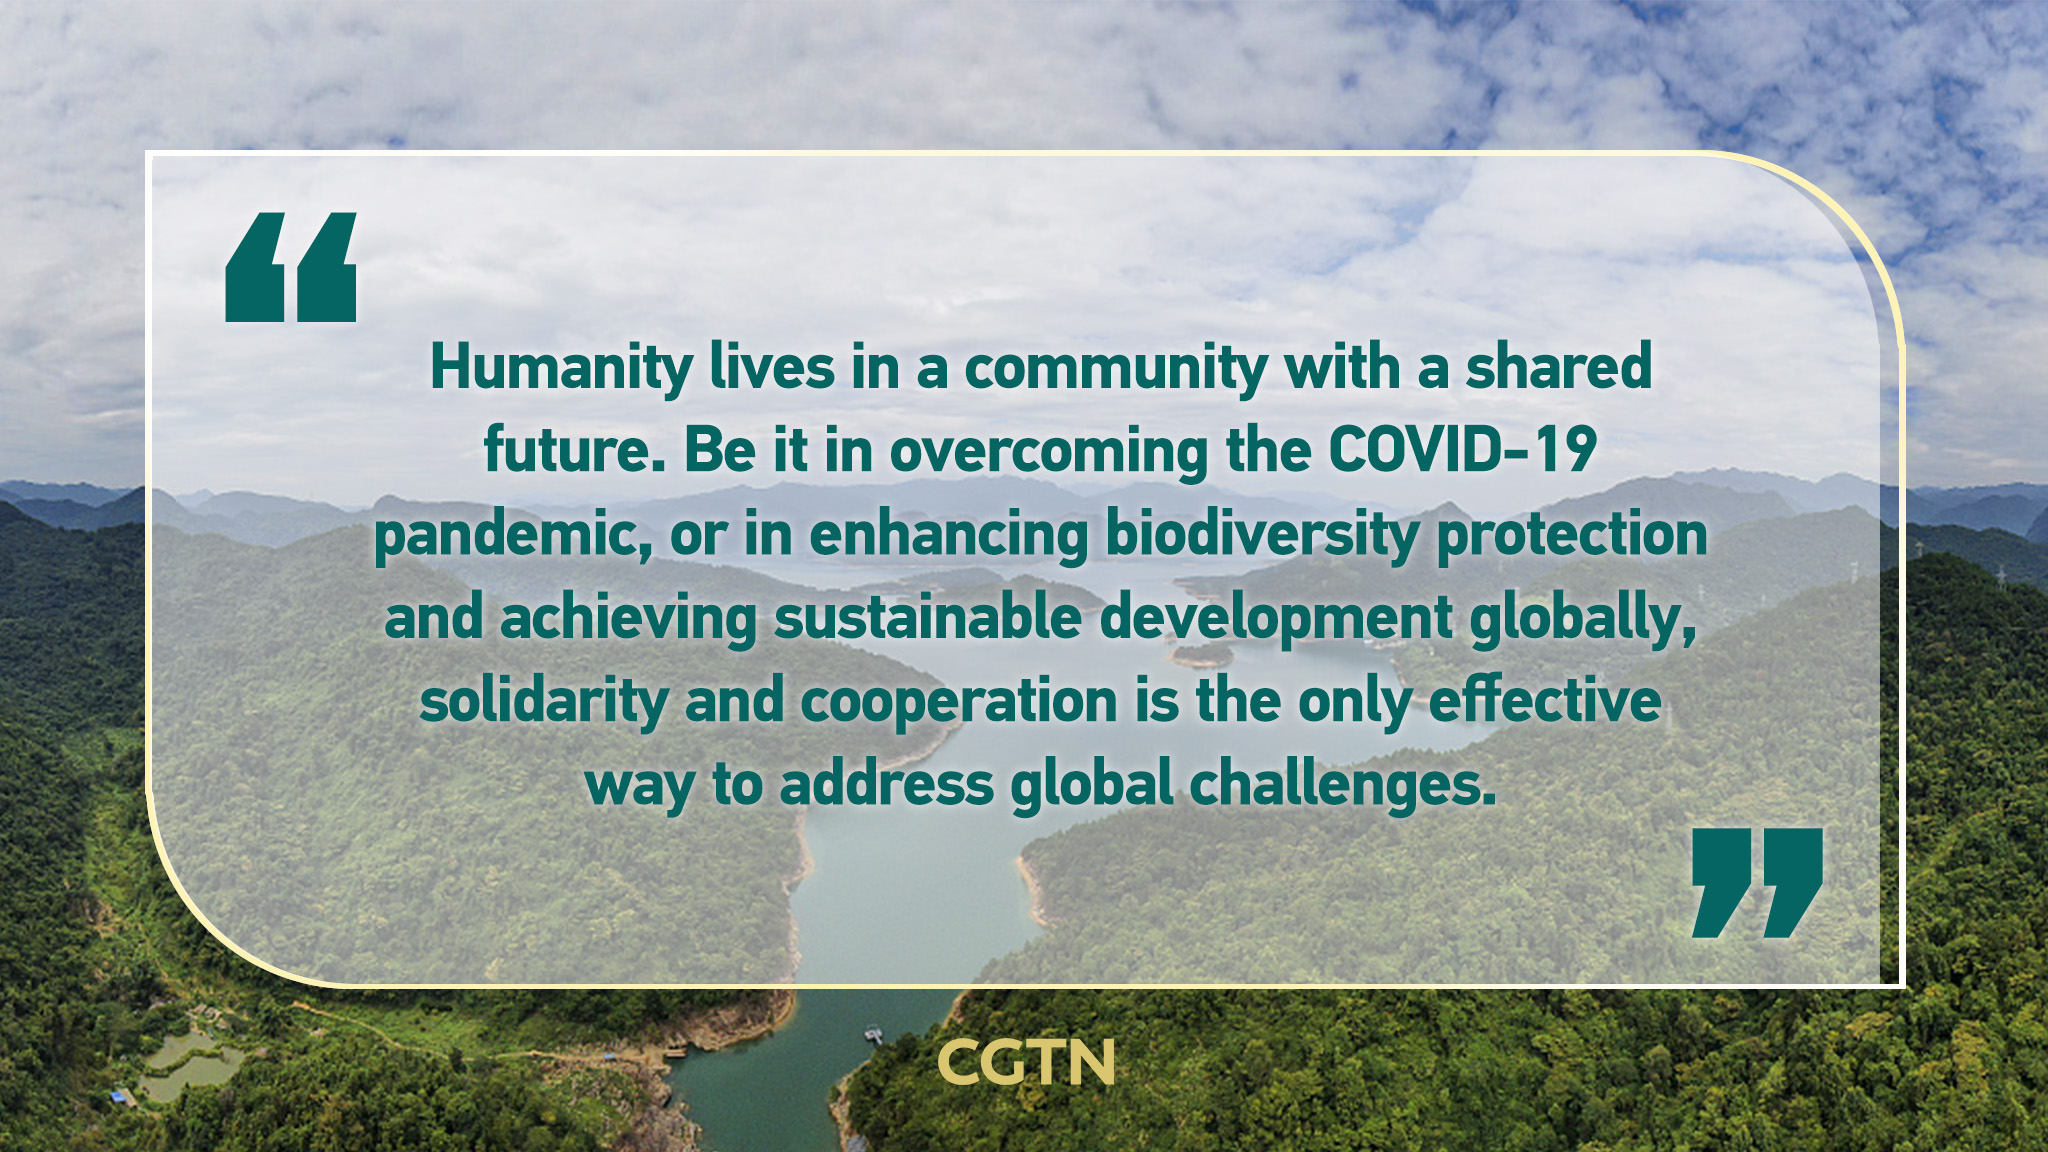 Key quotes from Xi Jinping at opening ceremony of high-level segment of COP15 part 2